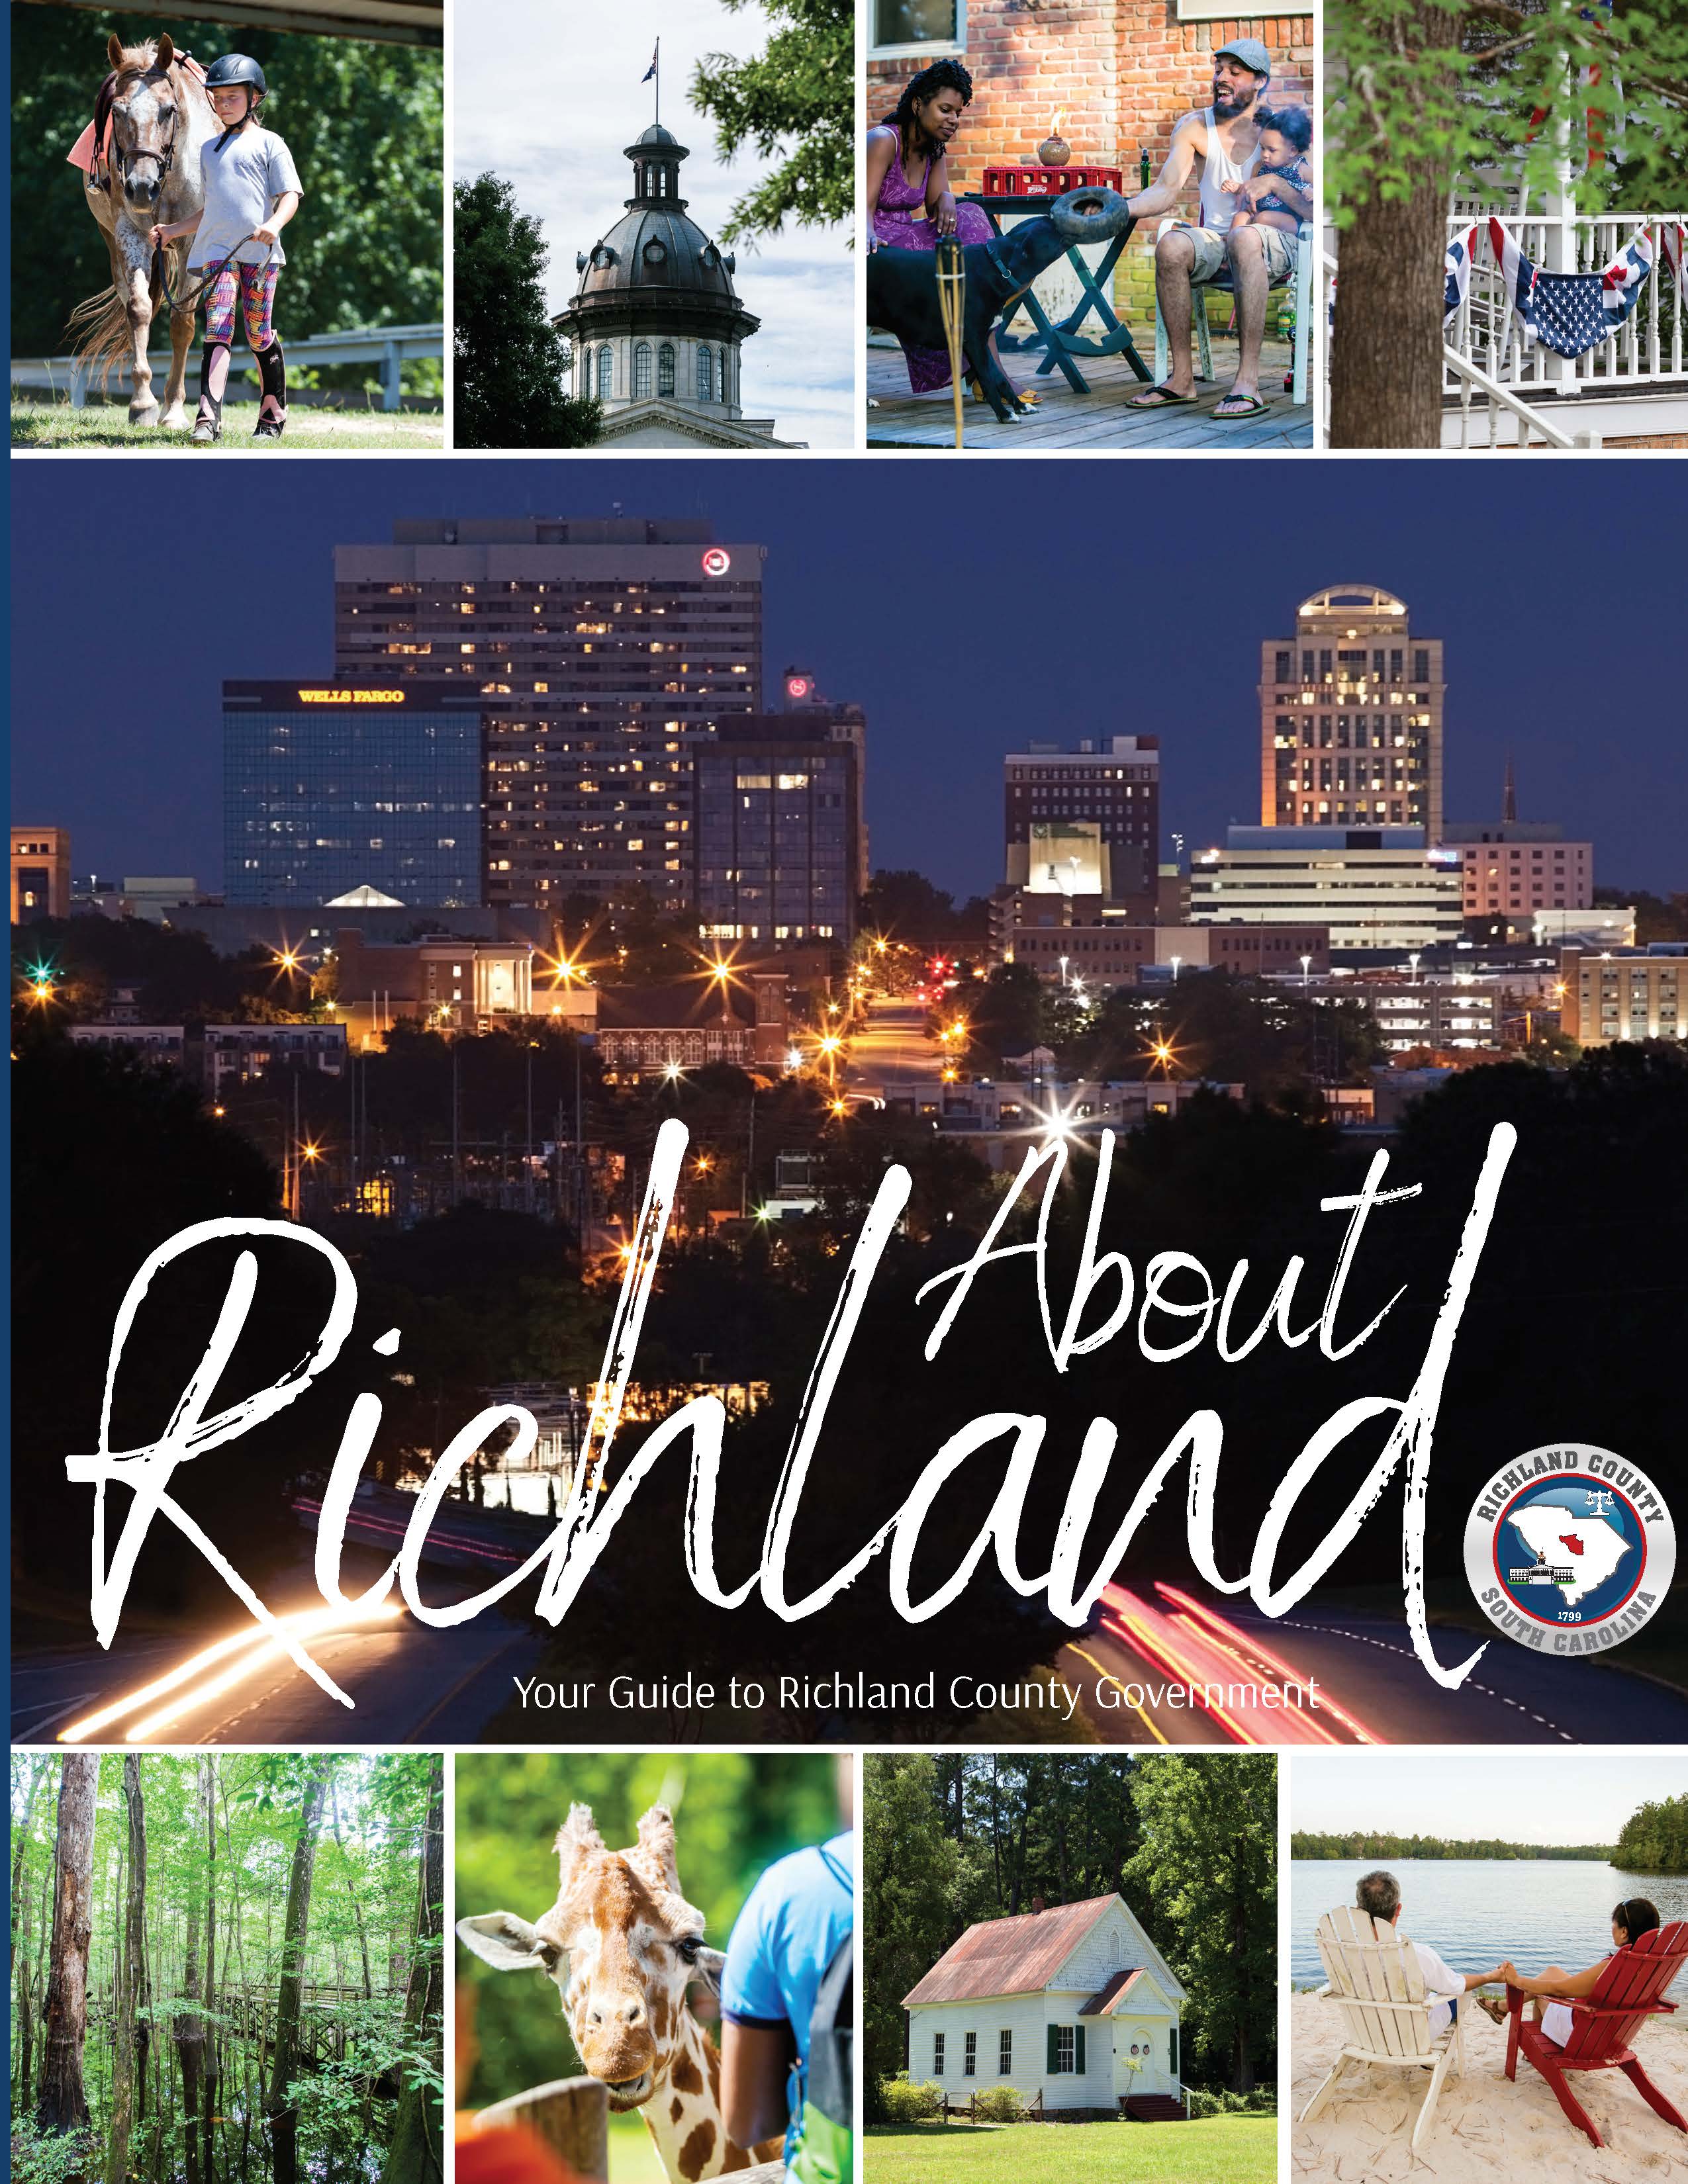 About Richland County